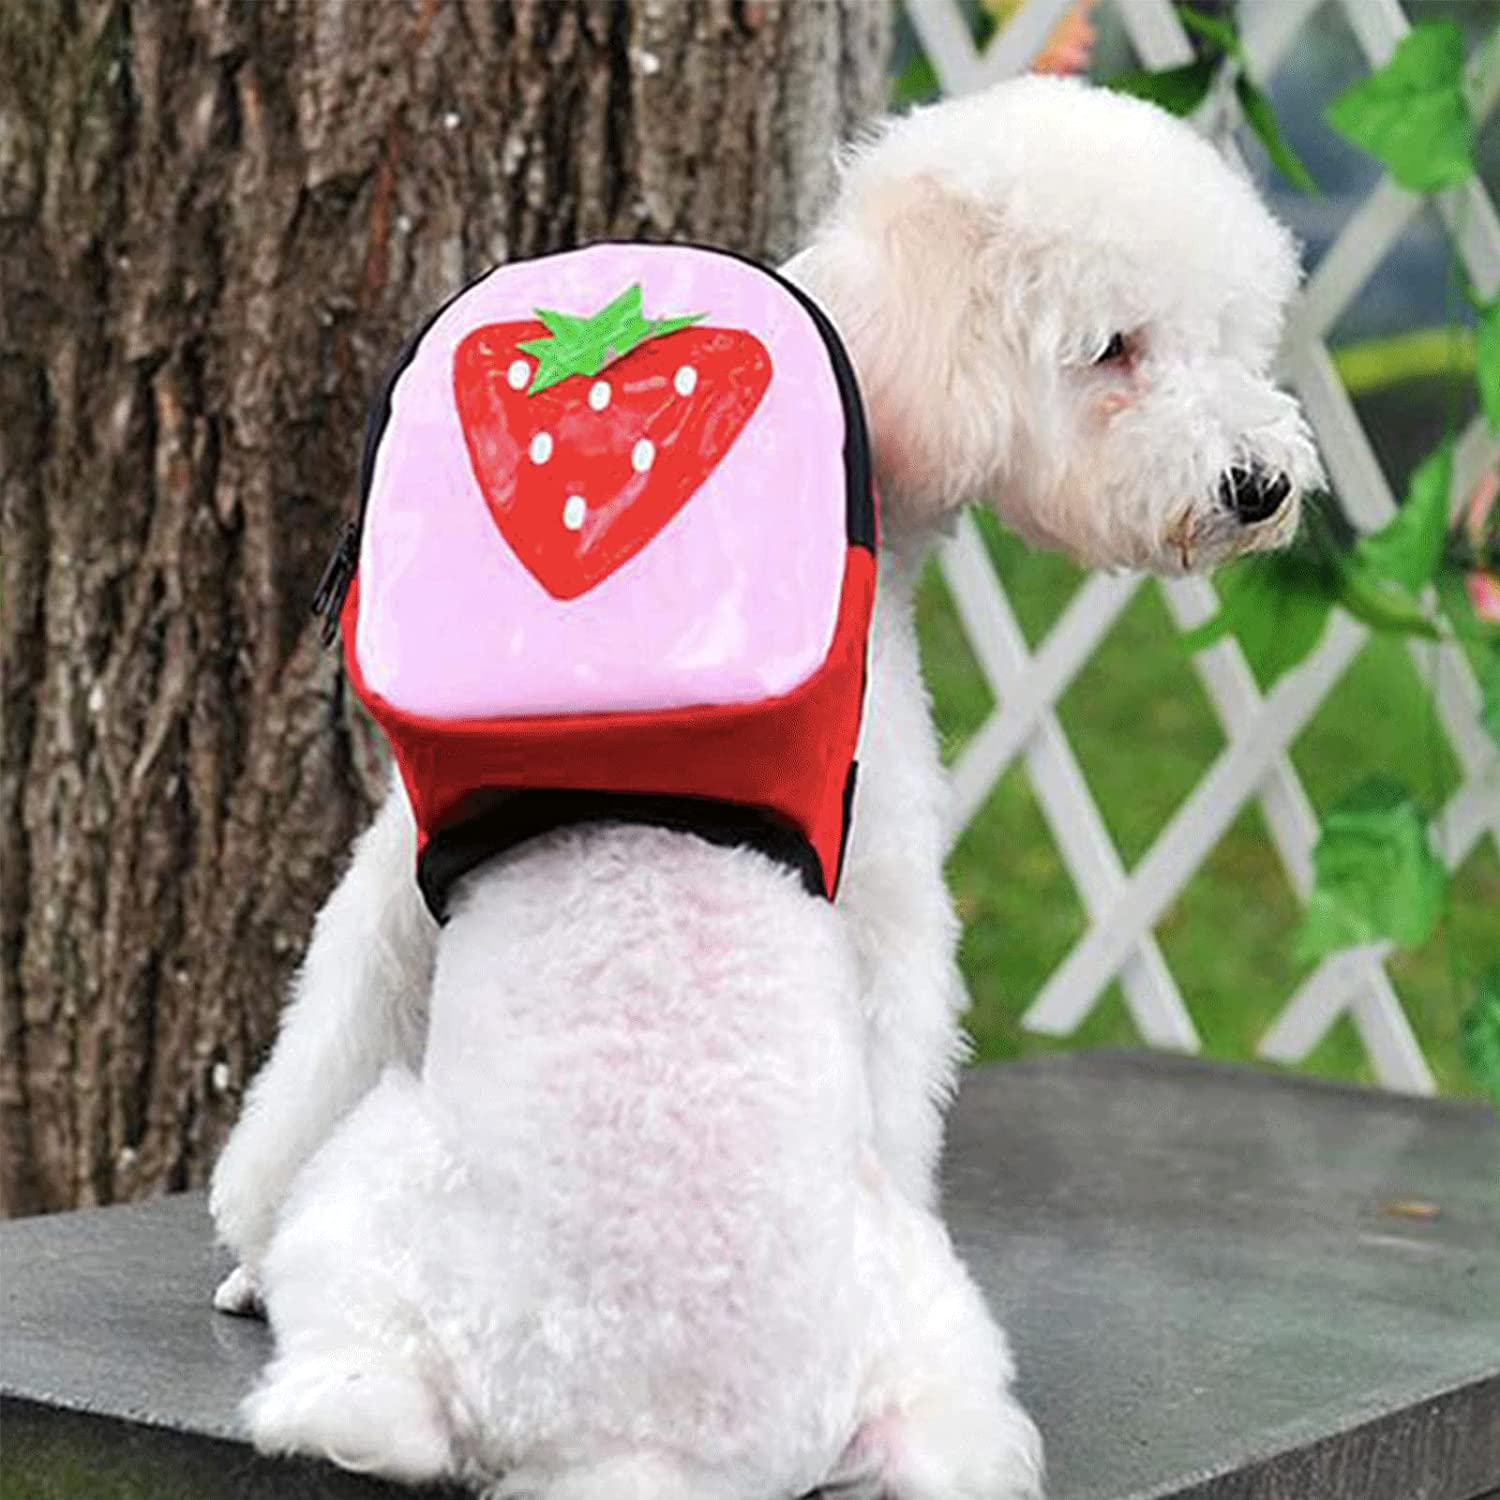 Pet Backpack, Cute Dog Backpack with Adjustable Straps for Small Dogs Cats. Dog Saddle Bags for Outdoor Travel Hiking